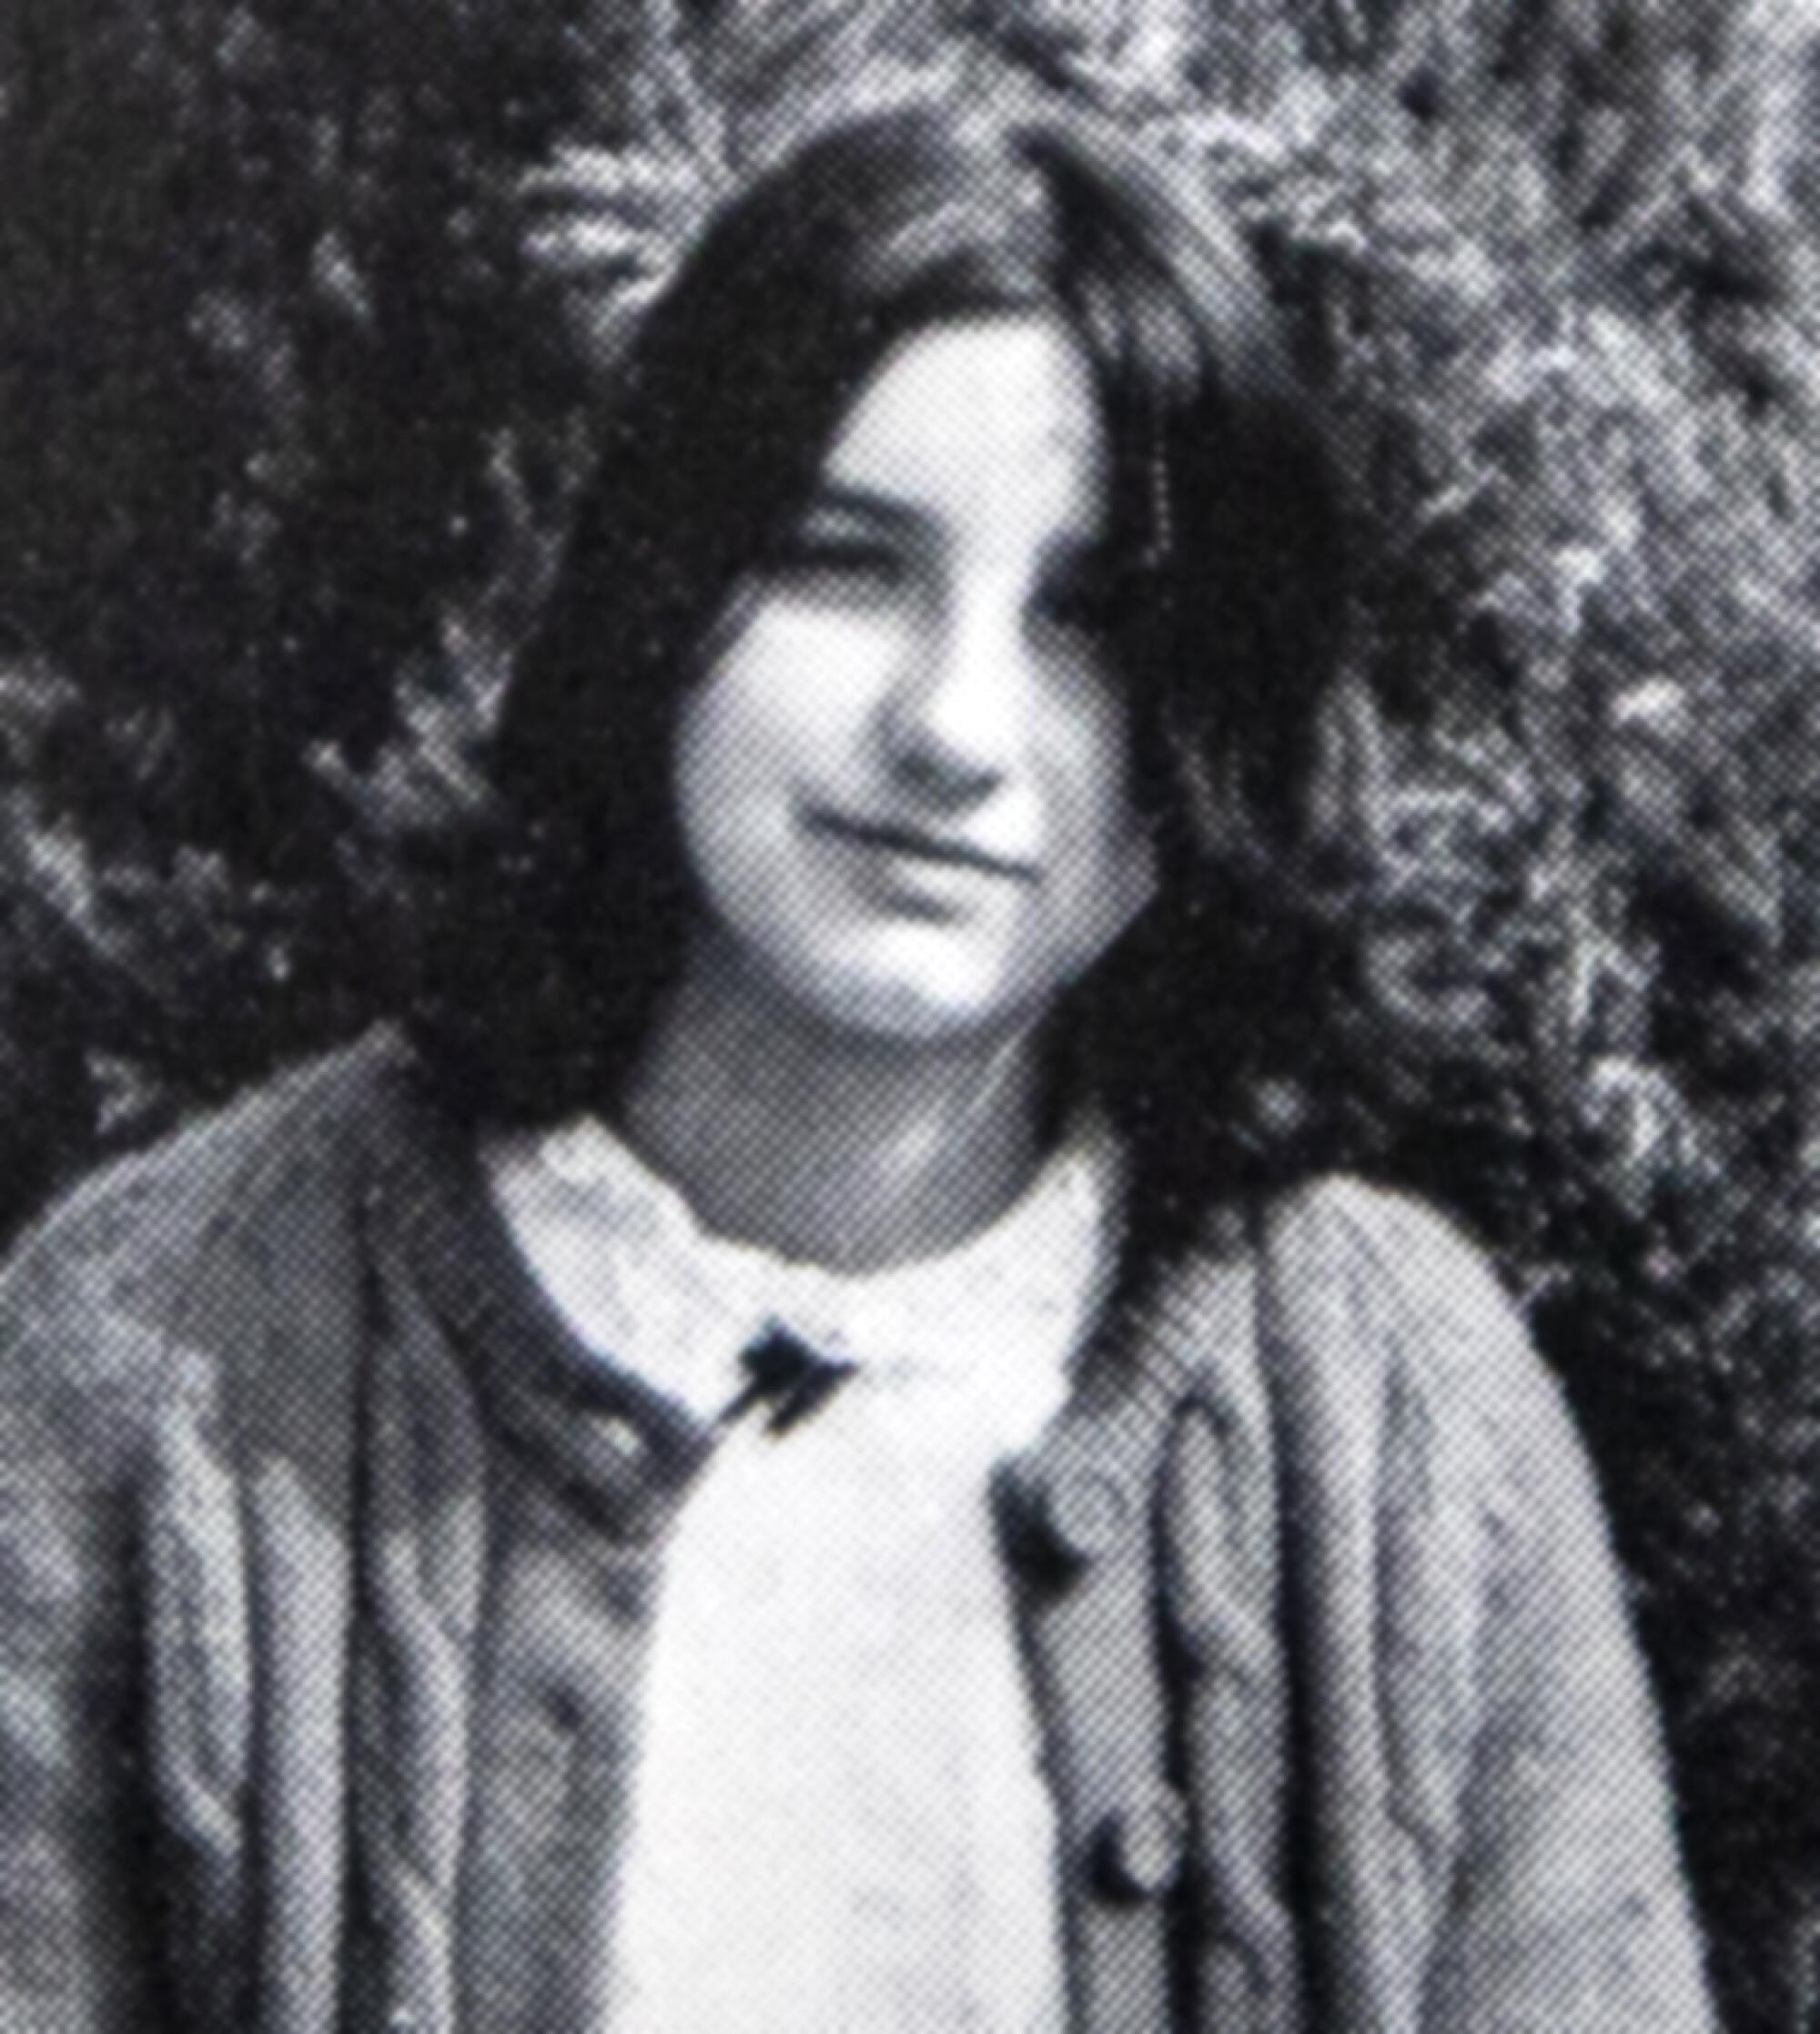 A black-and-white photo shows a girl with dark, shoulder-length hair. She is smiling slightly and wearing a cardigan sweater